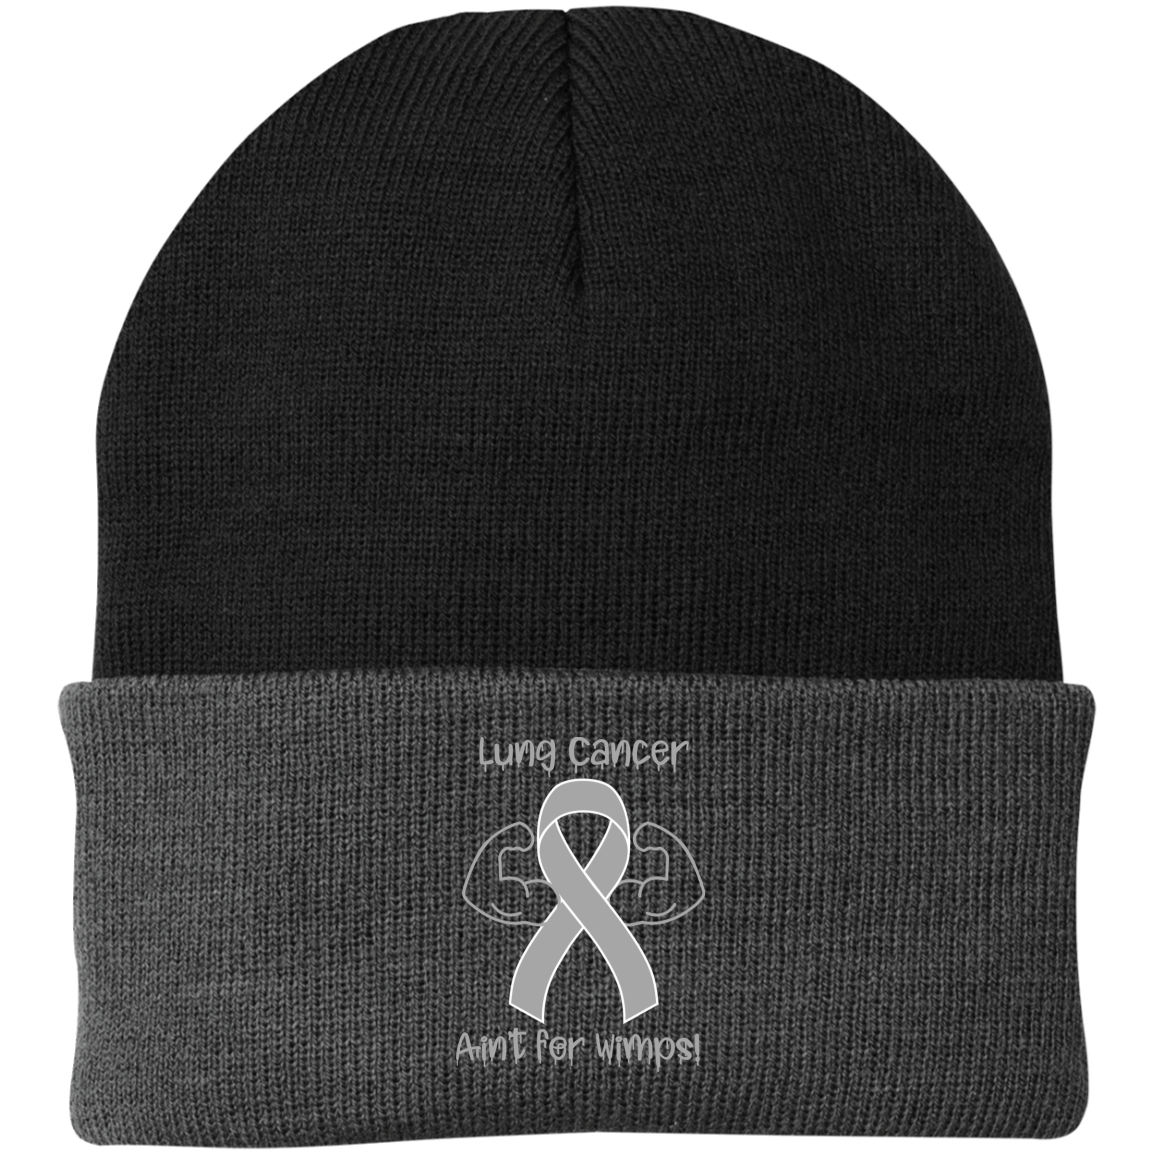 LC Wimps Embroidered Knit Cap